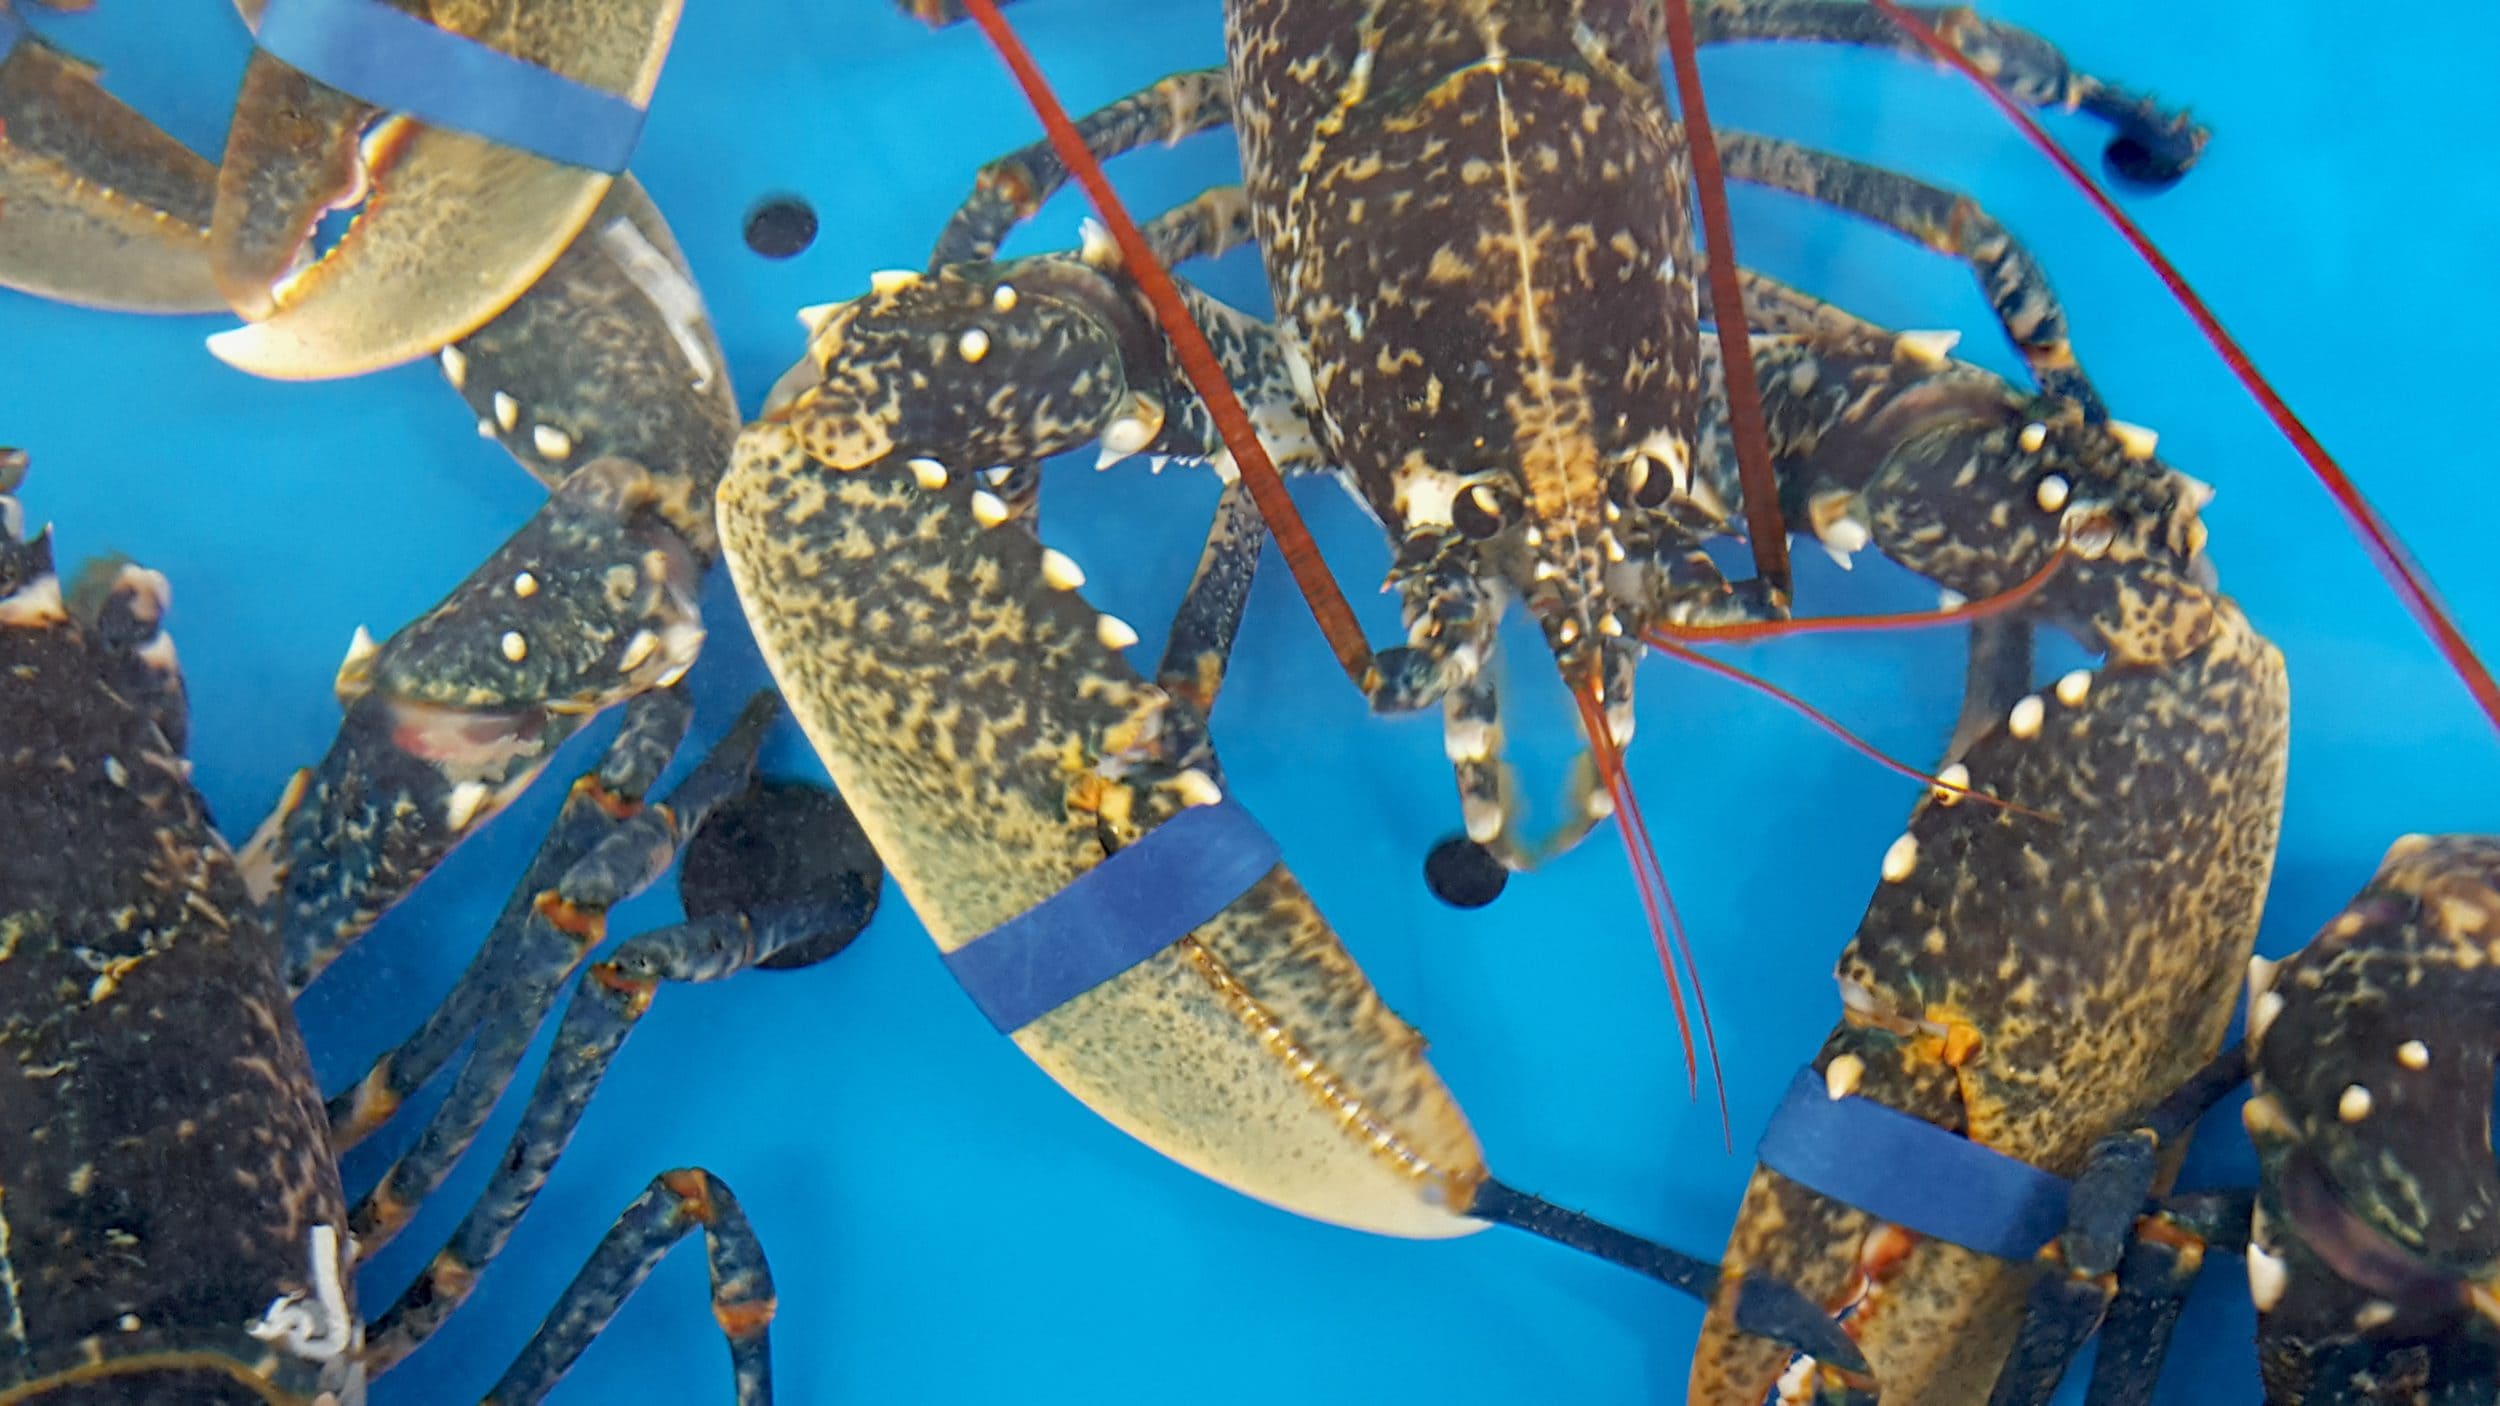 Lobsters on a blue boat